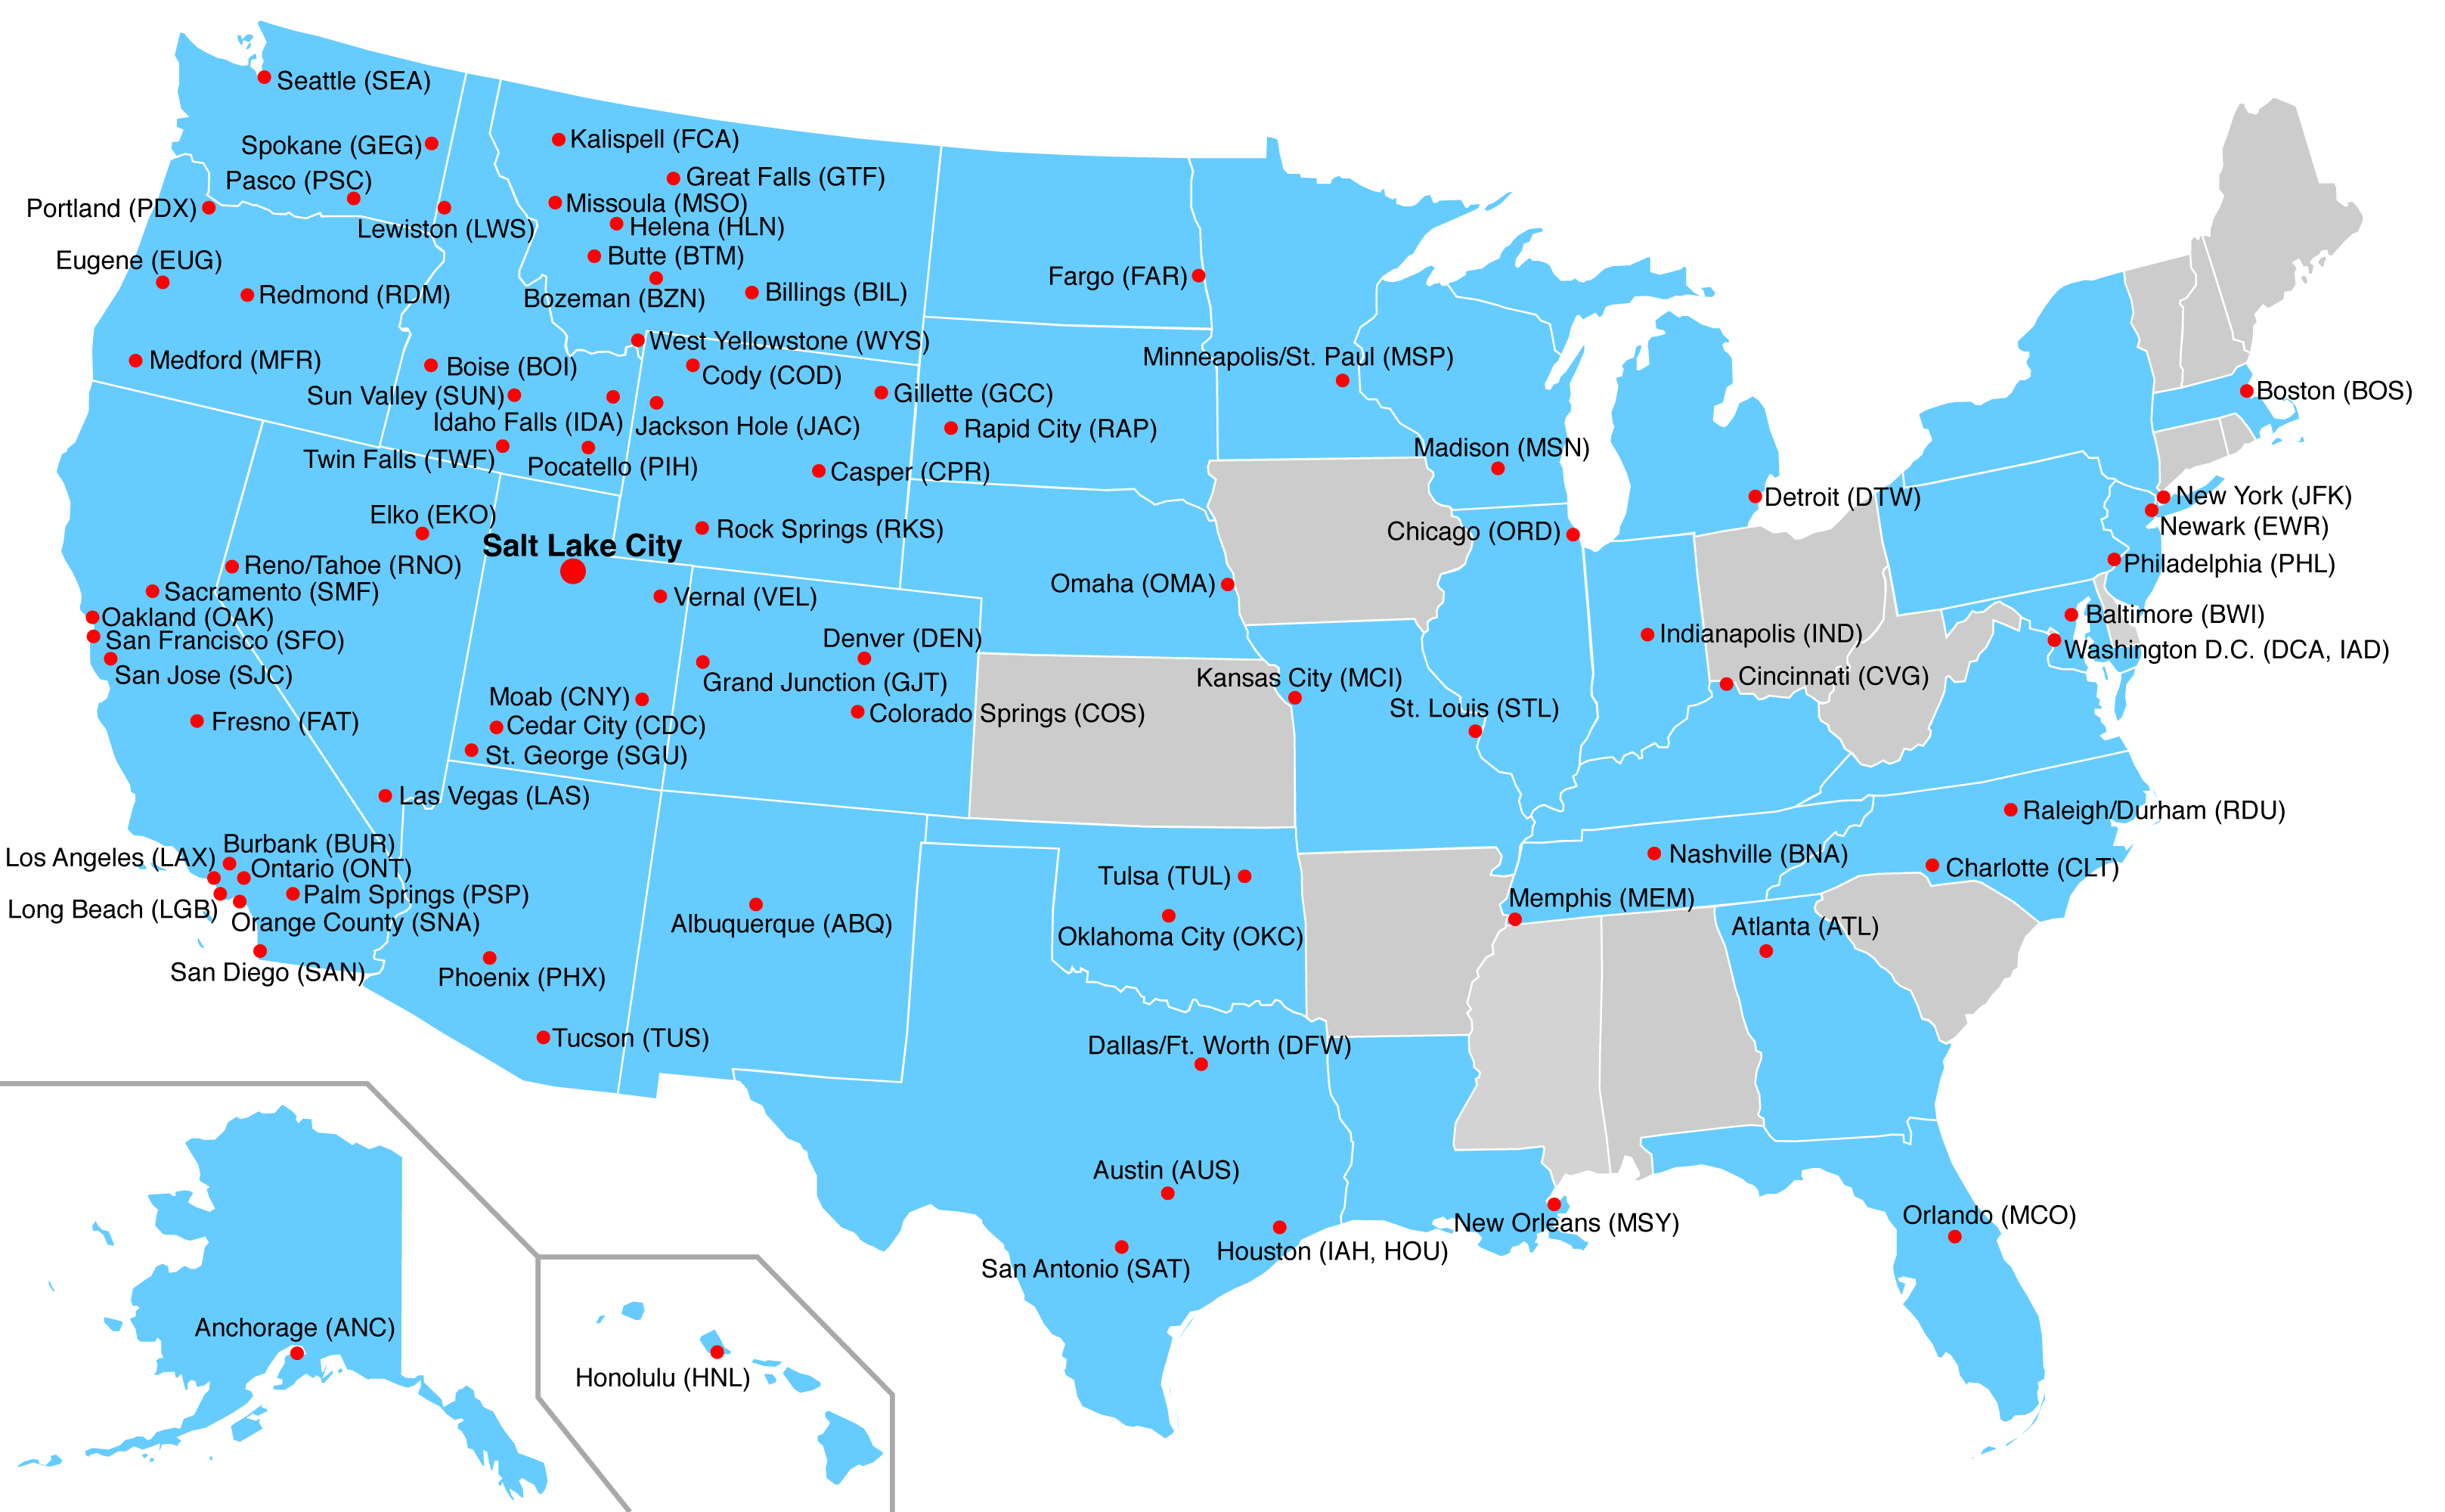 maps clipart map united states